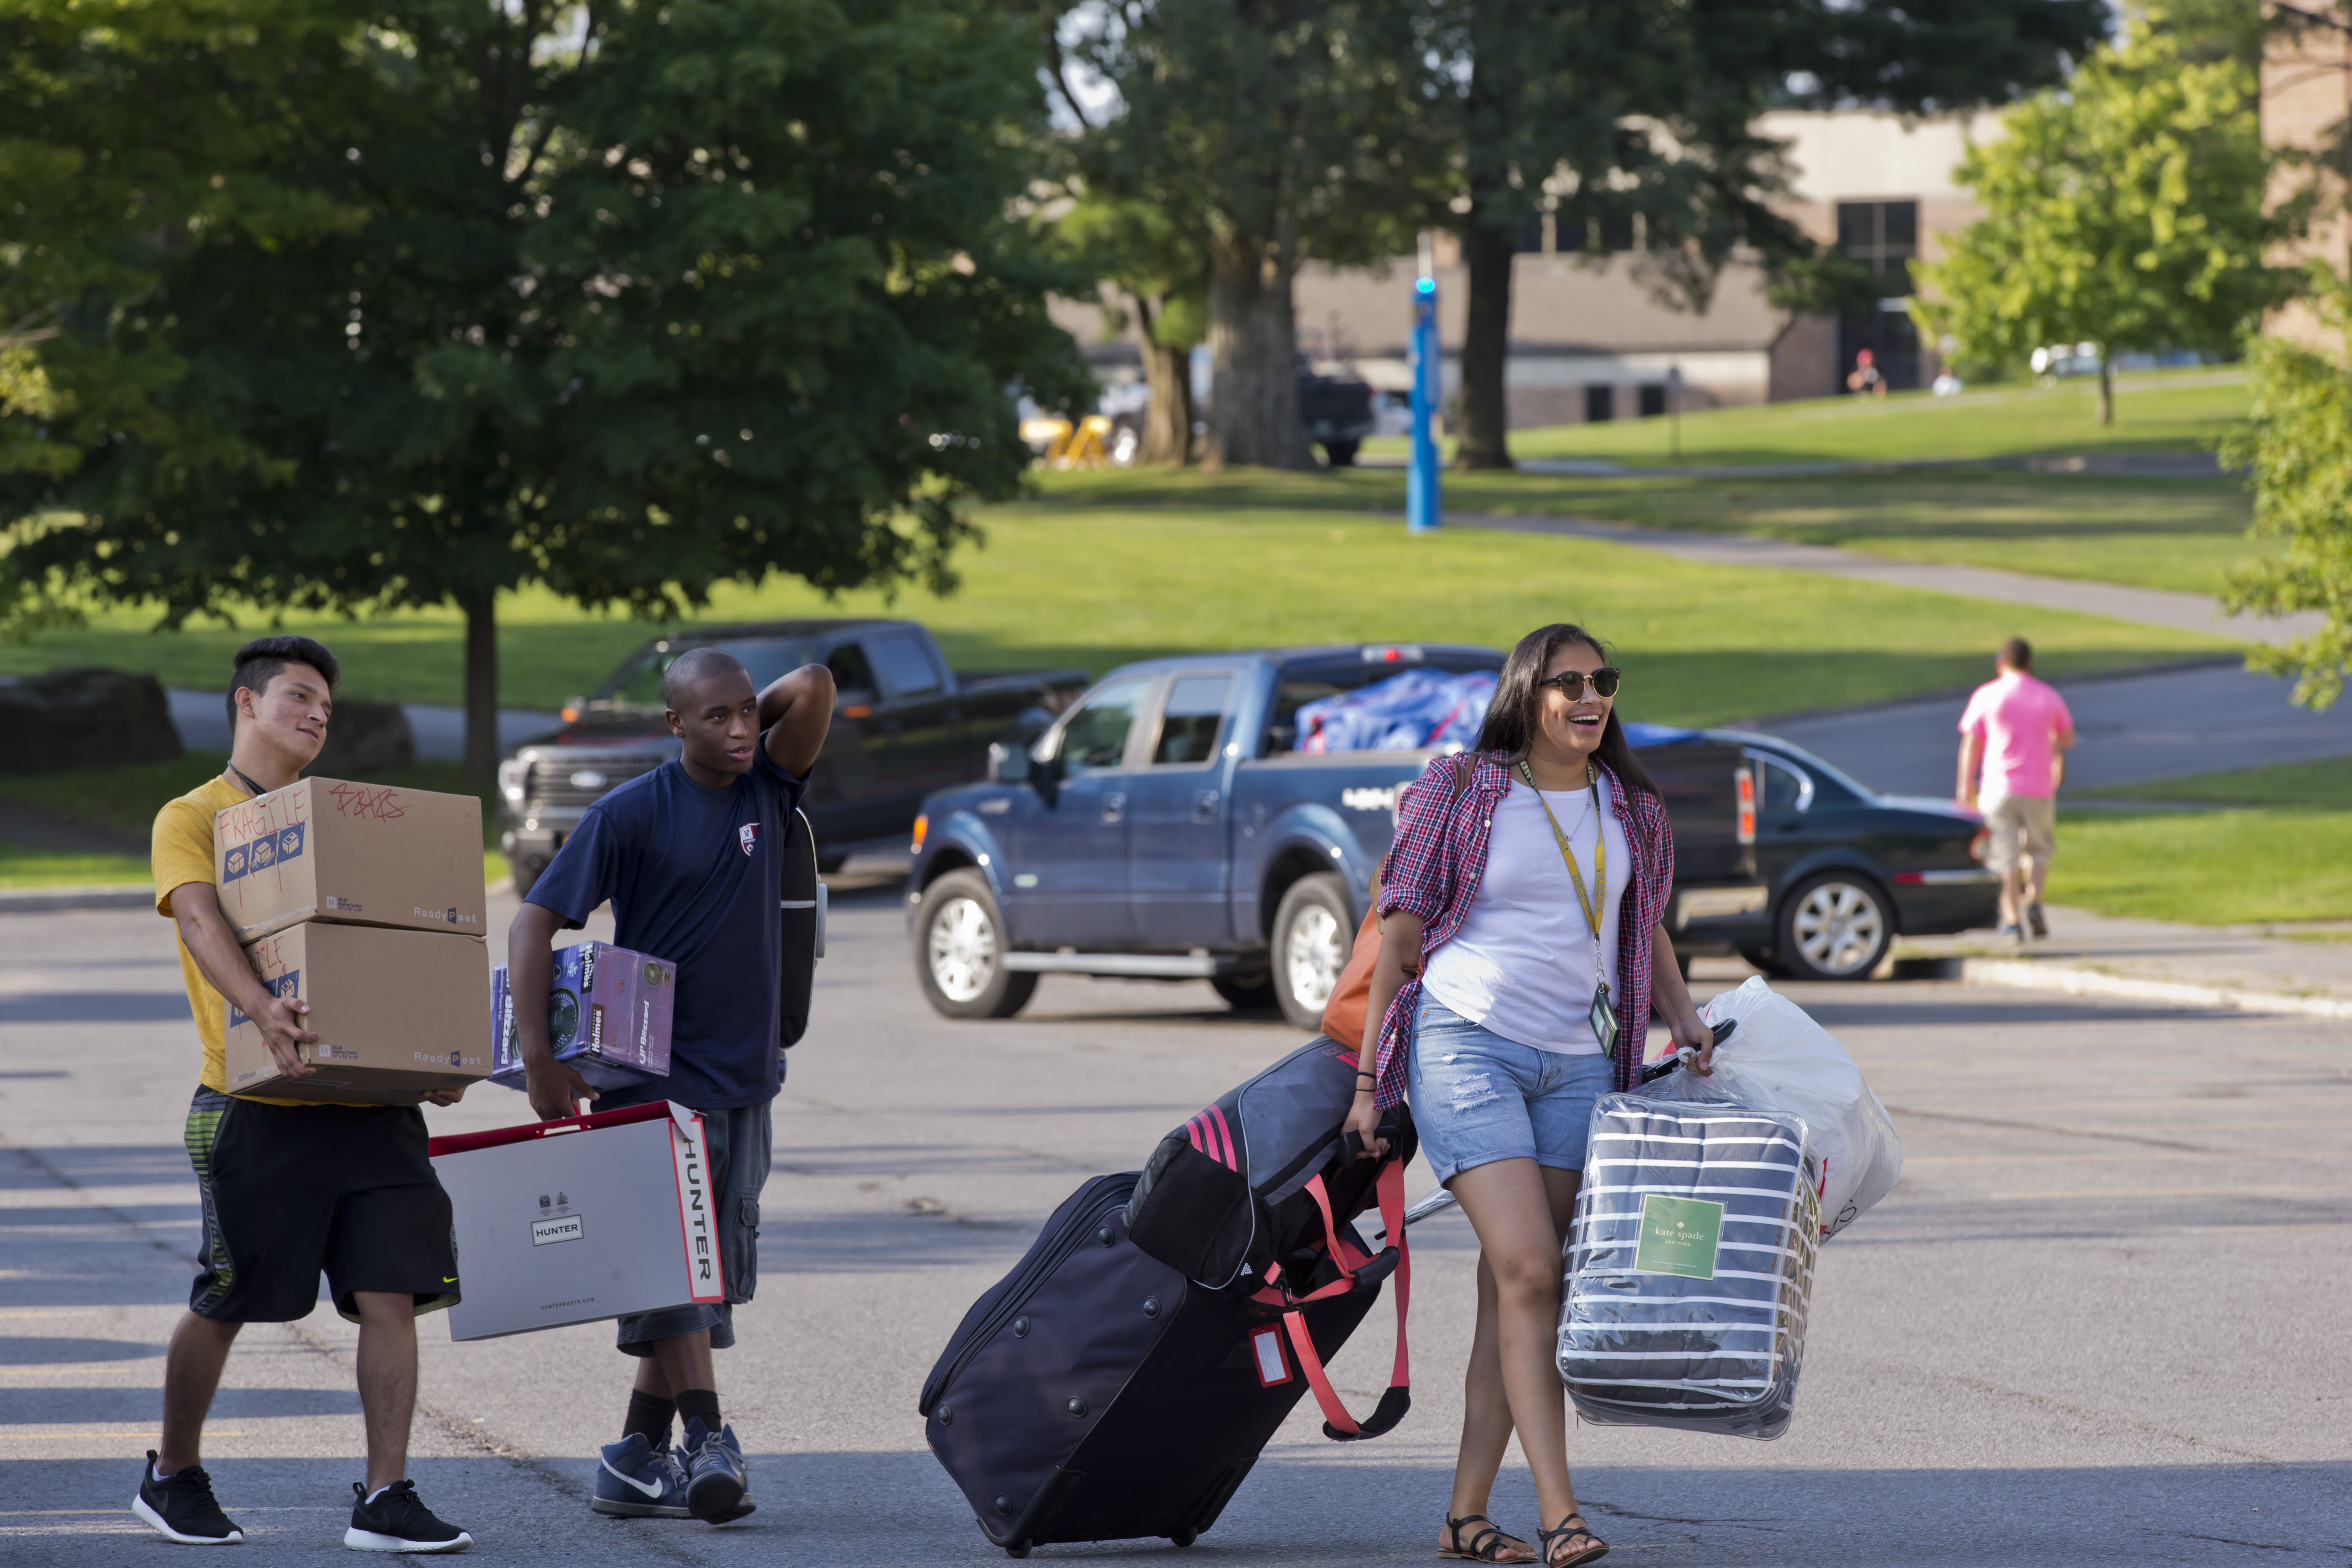 New Clarkson students move their personal items in to their residence halls during move in weekend